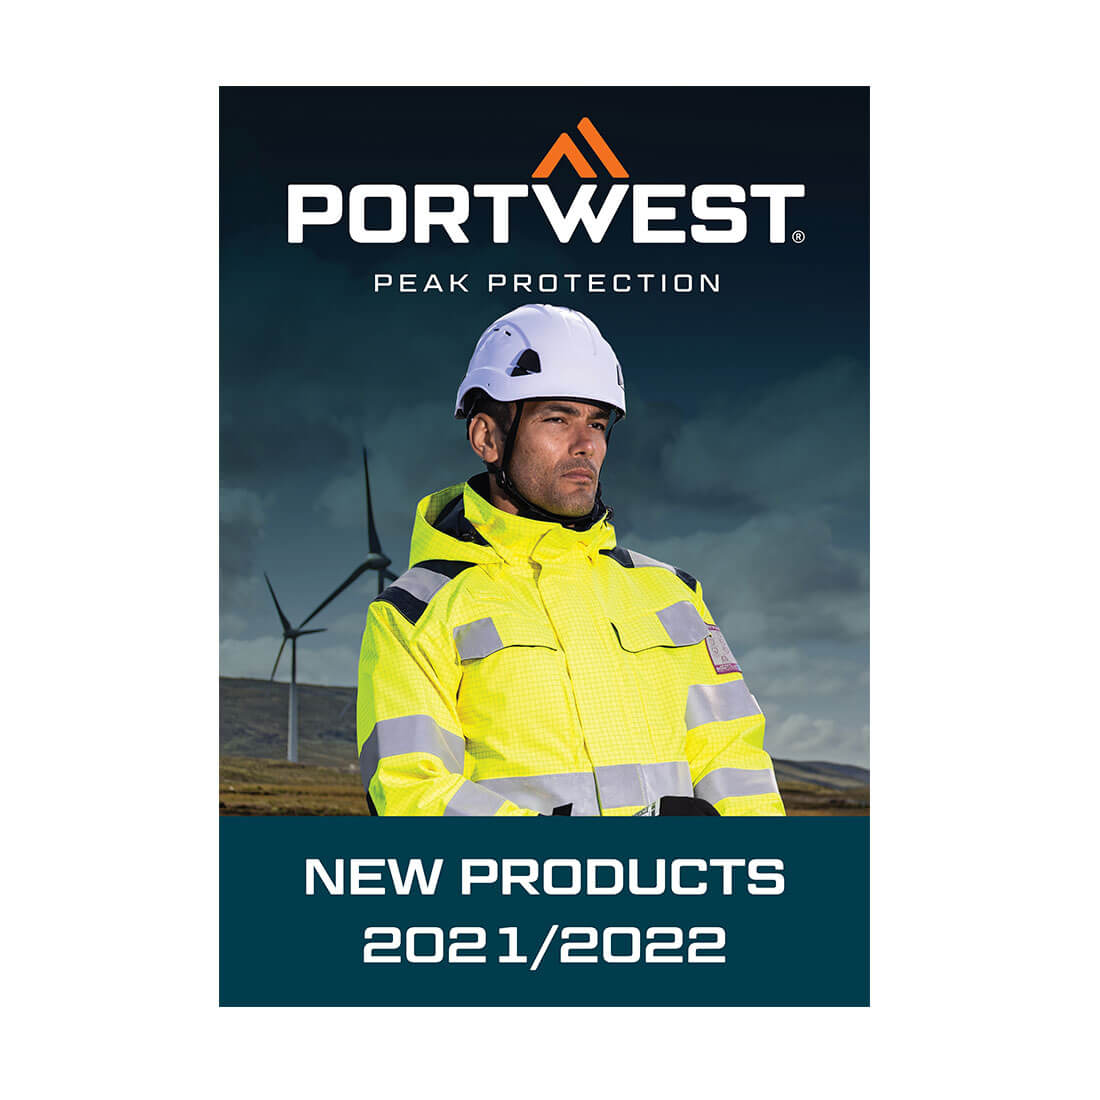 Portwest New Product Booklet